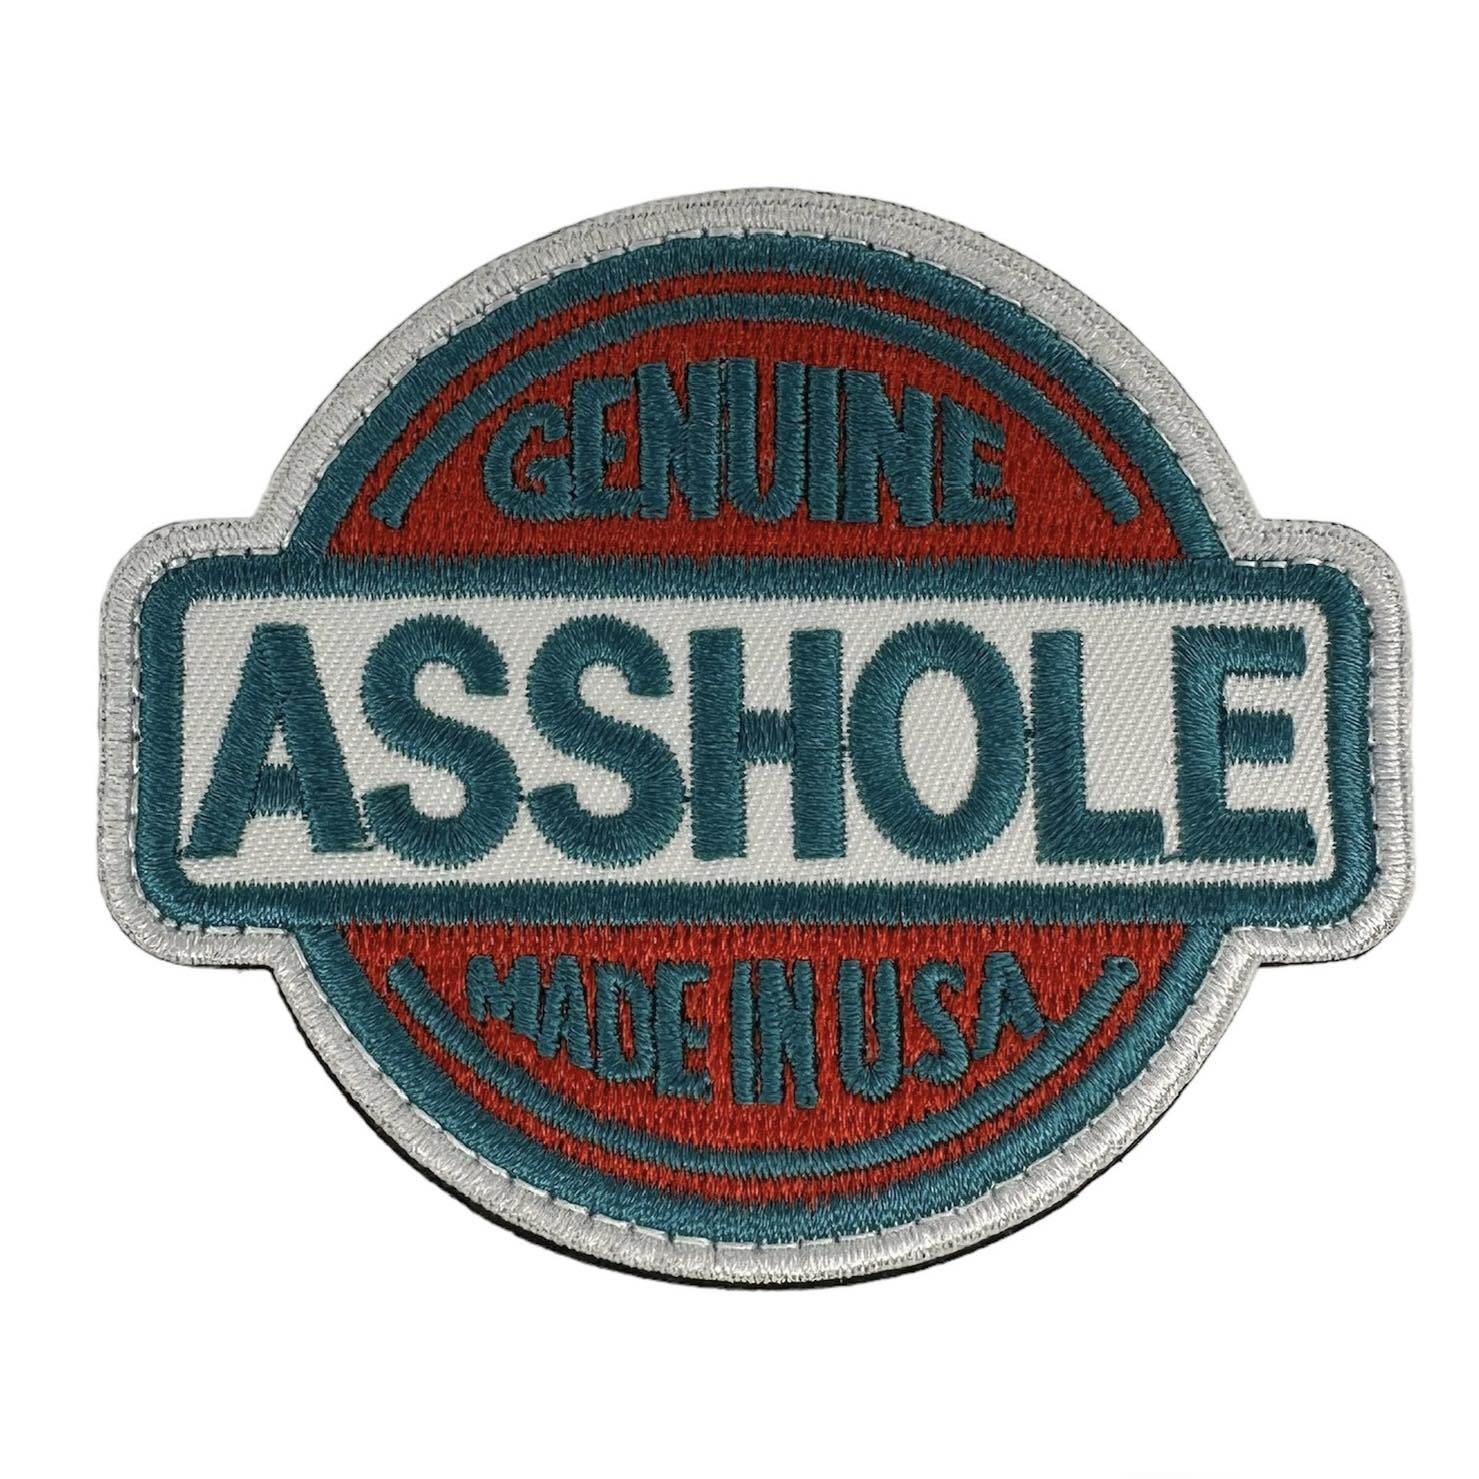 Embroidery Patch - Genuine Asshole Made in USA